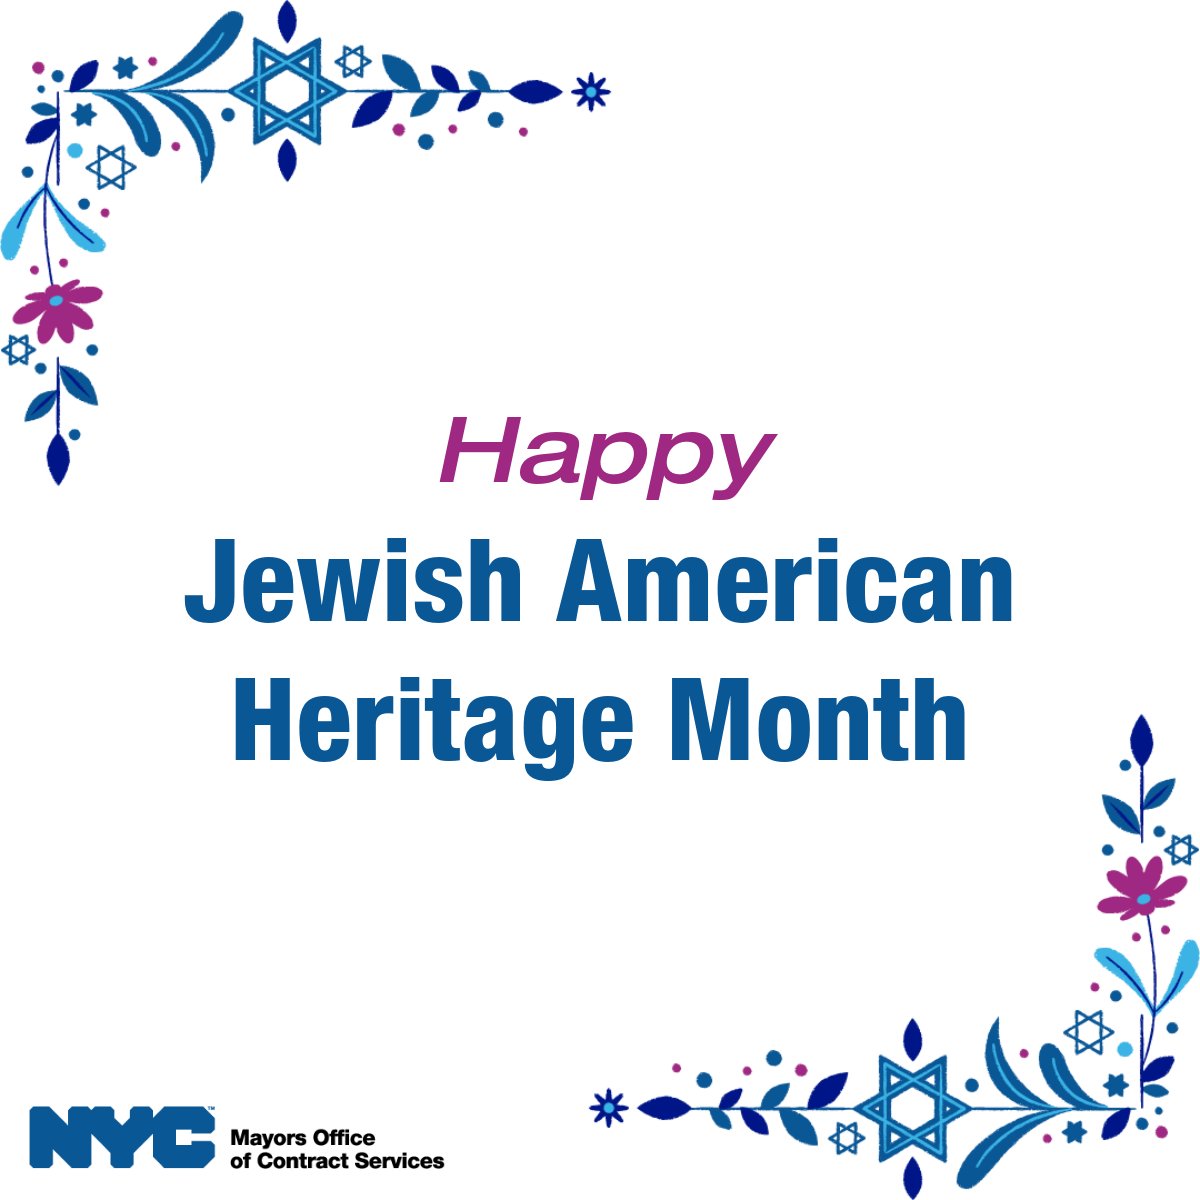 🌟 May is Jewish American Heritage Month! 🌟

Let's celebrate the rich heritage and contributions of Jewish Americans, honoring their resilience and cultural impact. Join us in recognizing and celebrating diversity this May!
#JewishAmericanHeritageMonth #CelebrateDiversity